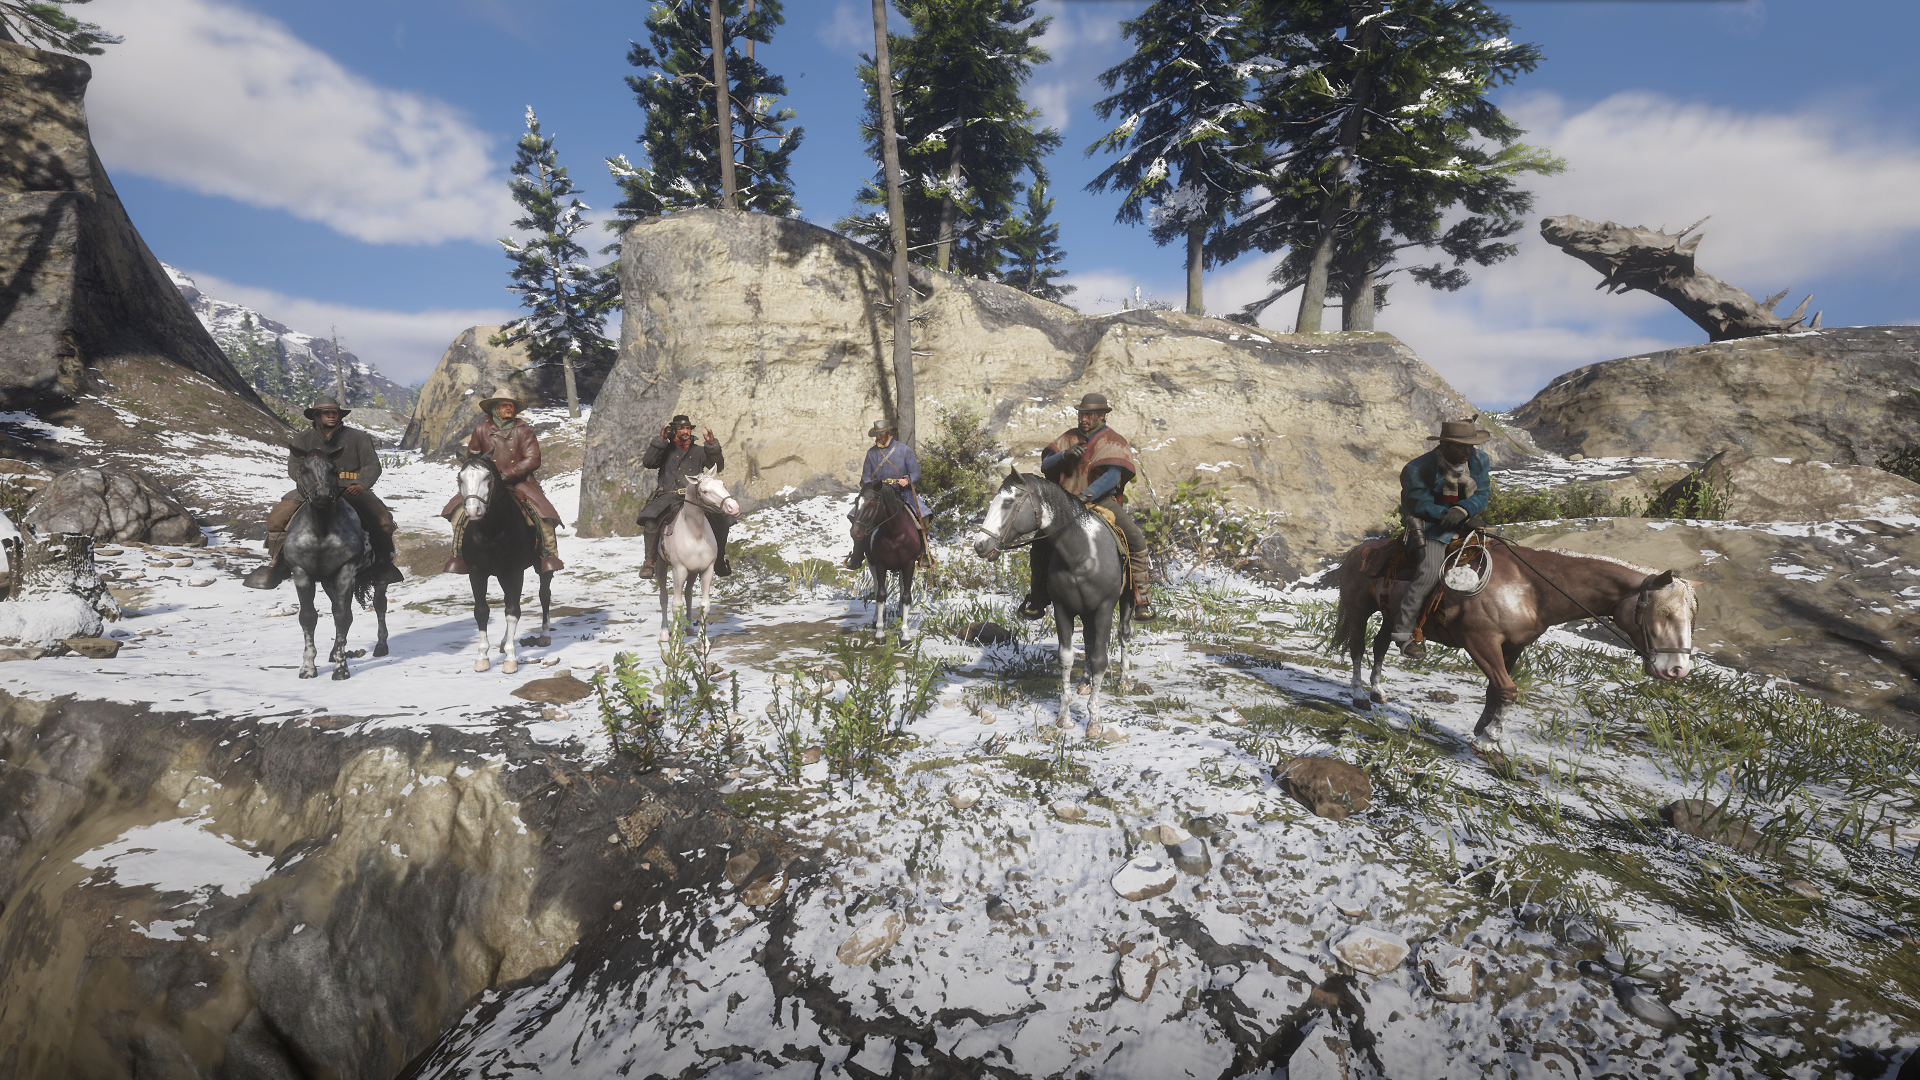 General 1920x1080 Red Dead Redemption 2 Rockstar Games trees video games horseback video game art screen shot video game characters CGI snow snow covered video game men gloves moustache beard sky clouds rocks horse animals